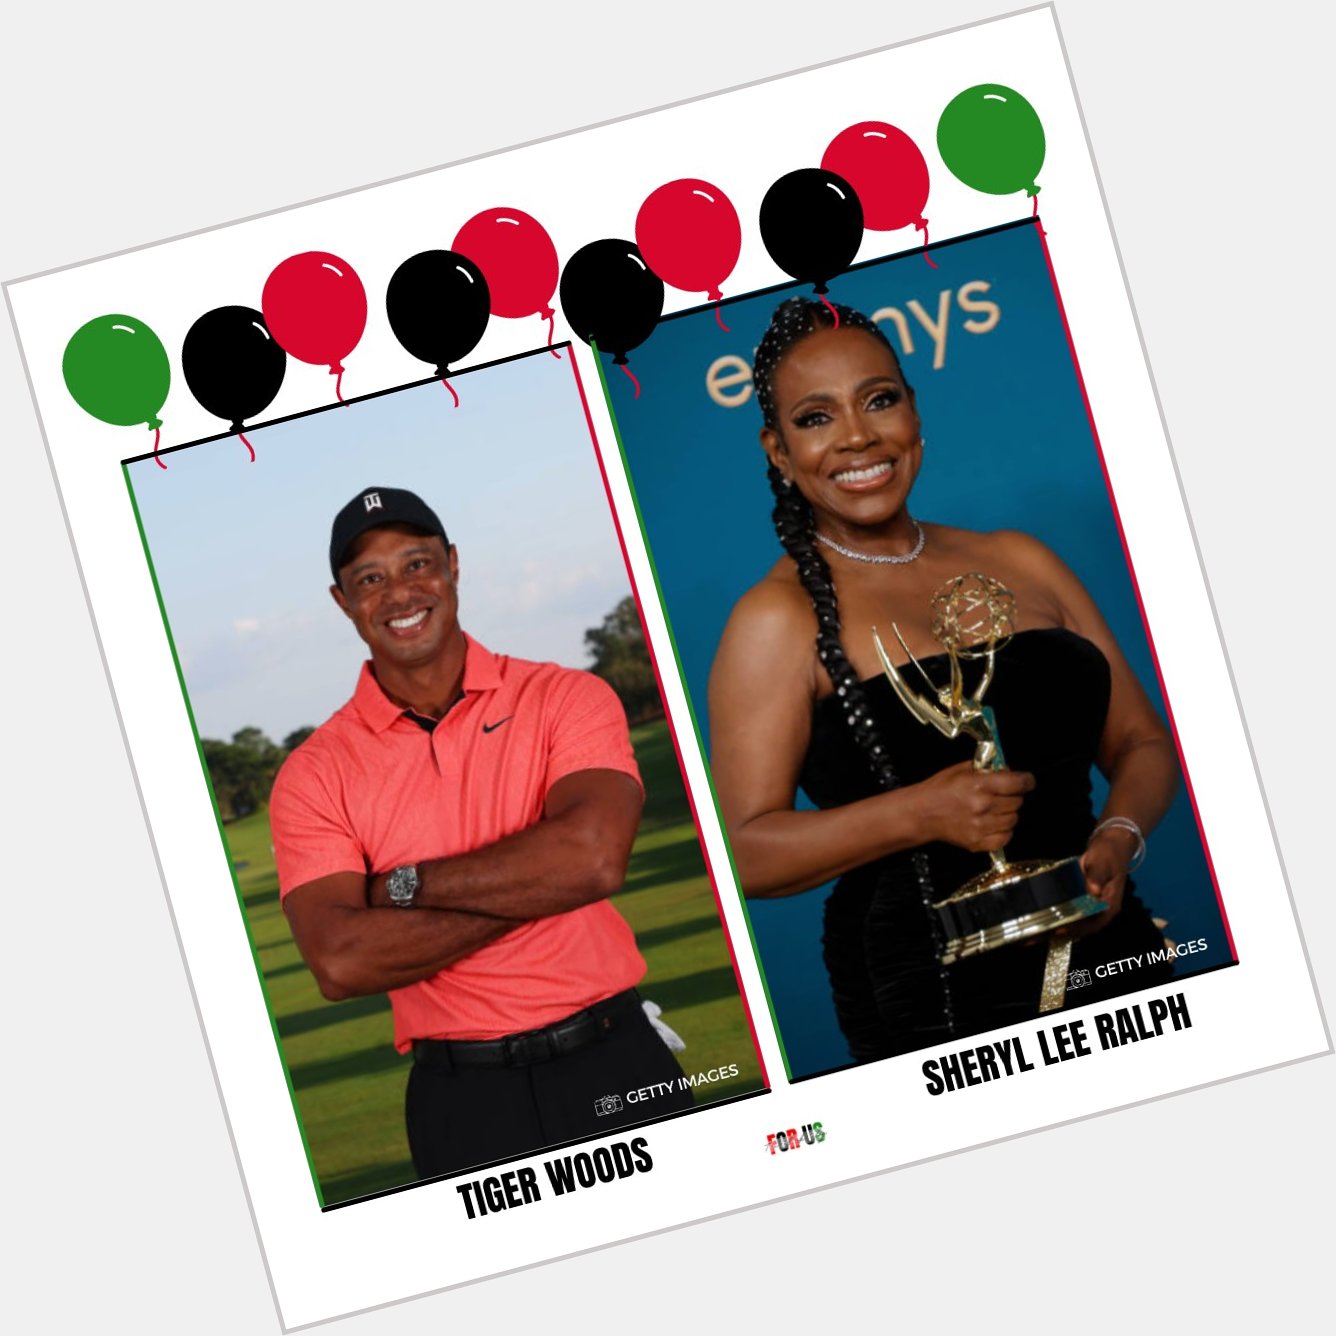 Join us in wishing Tiger Woods and Sheryl Lee Ralph, Happy Birthday 